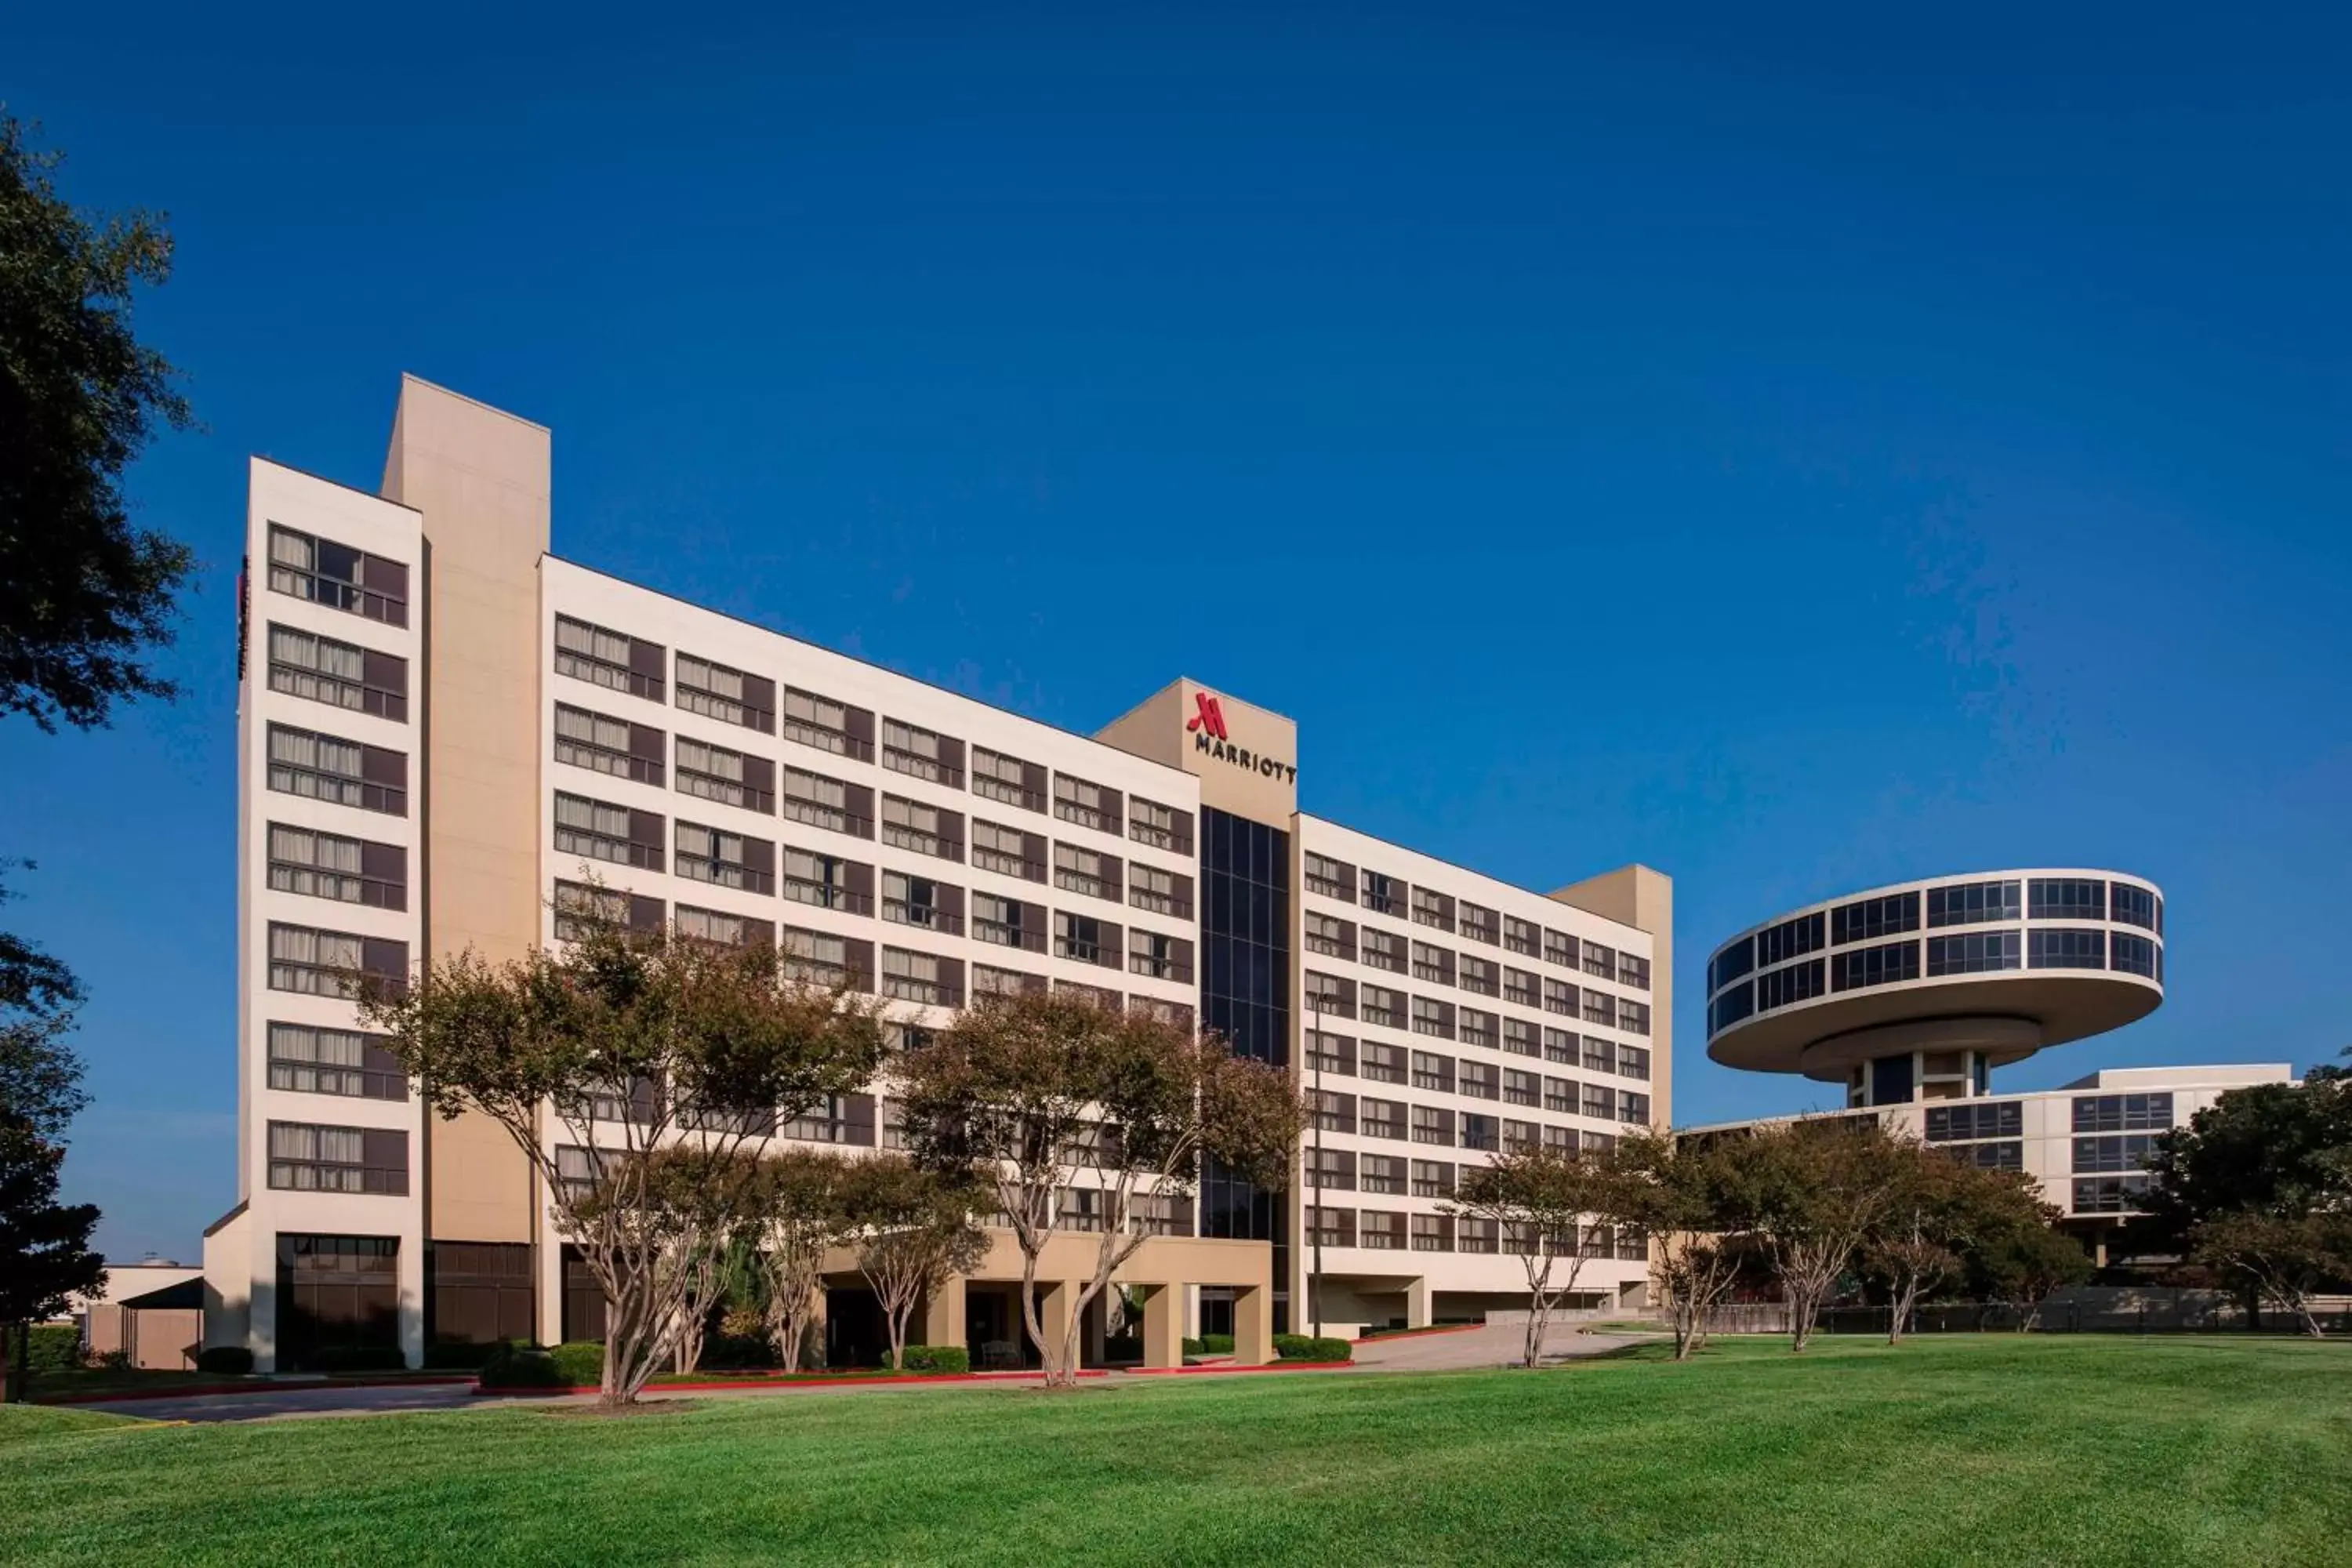 Property Building in Houston Airport Marriott at George Bush Intercontinental